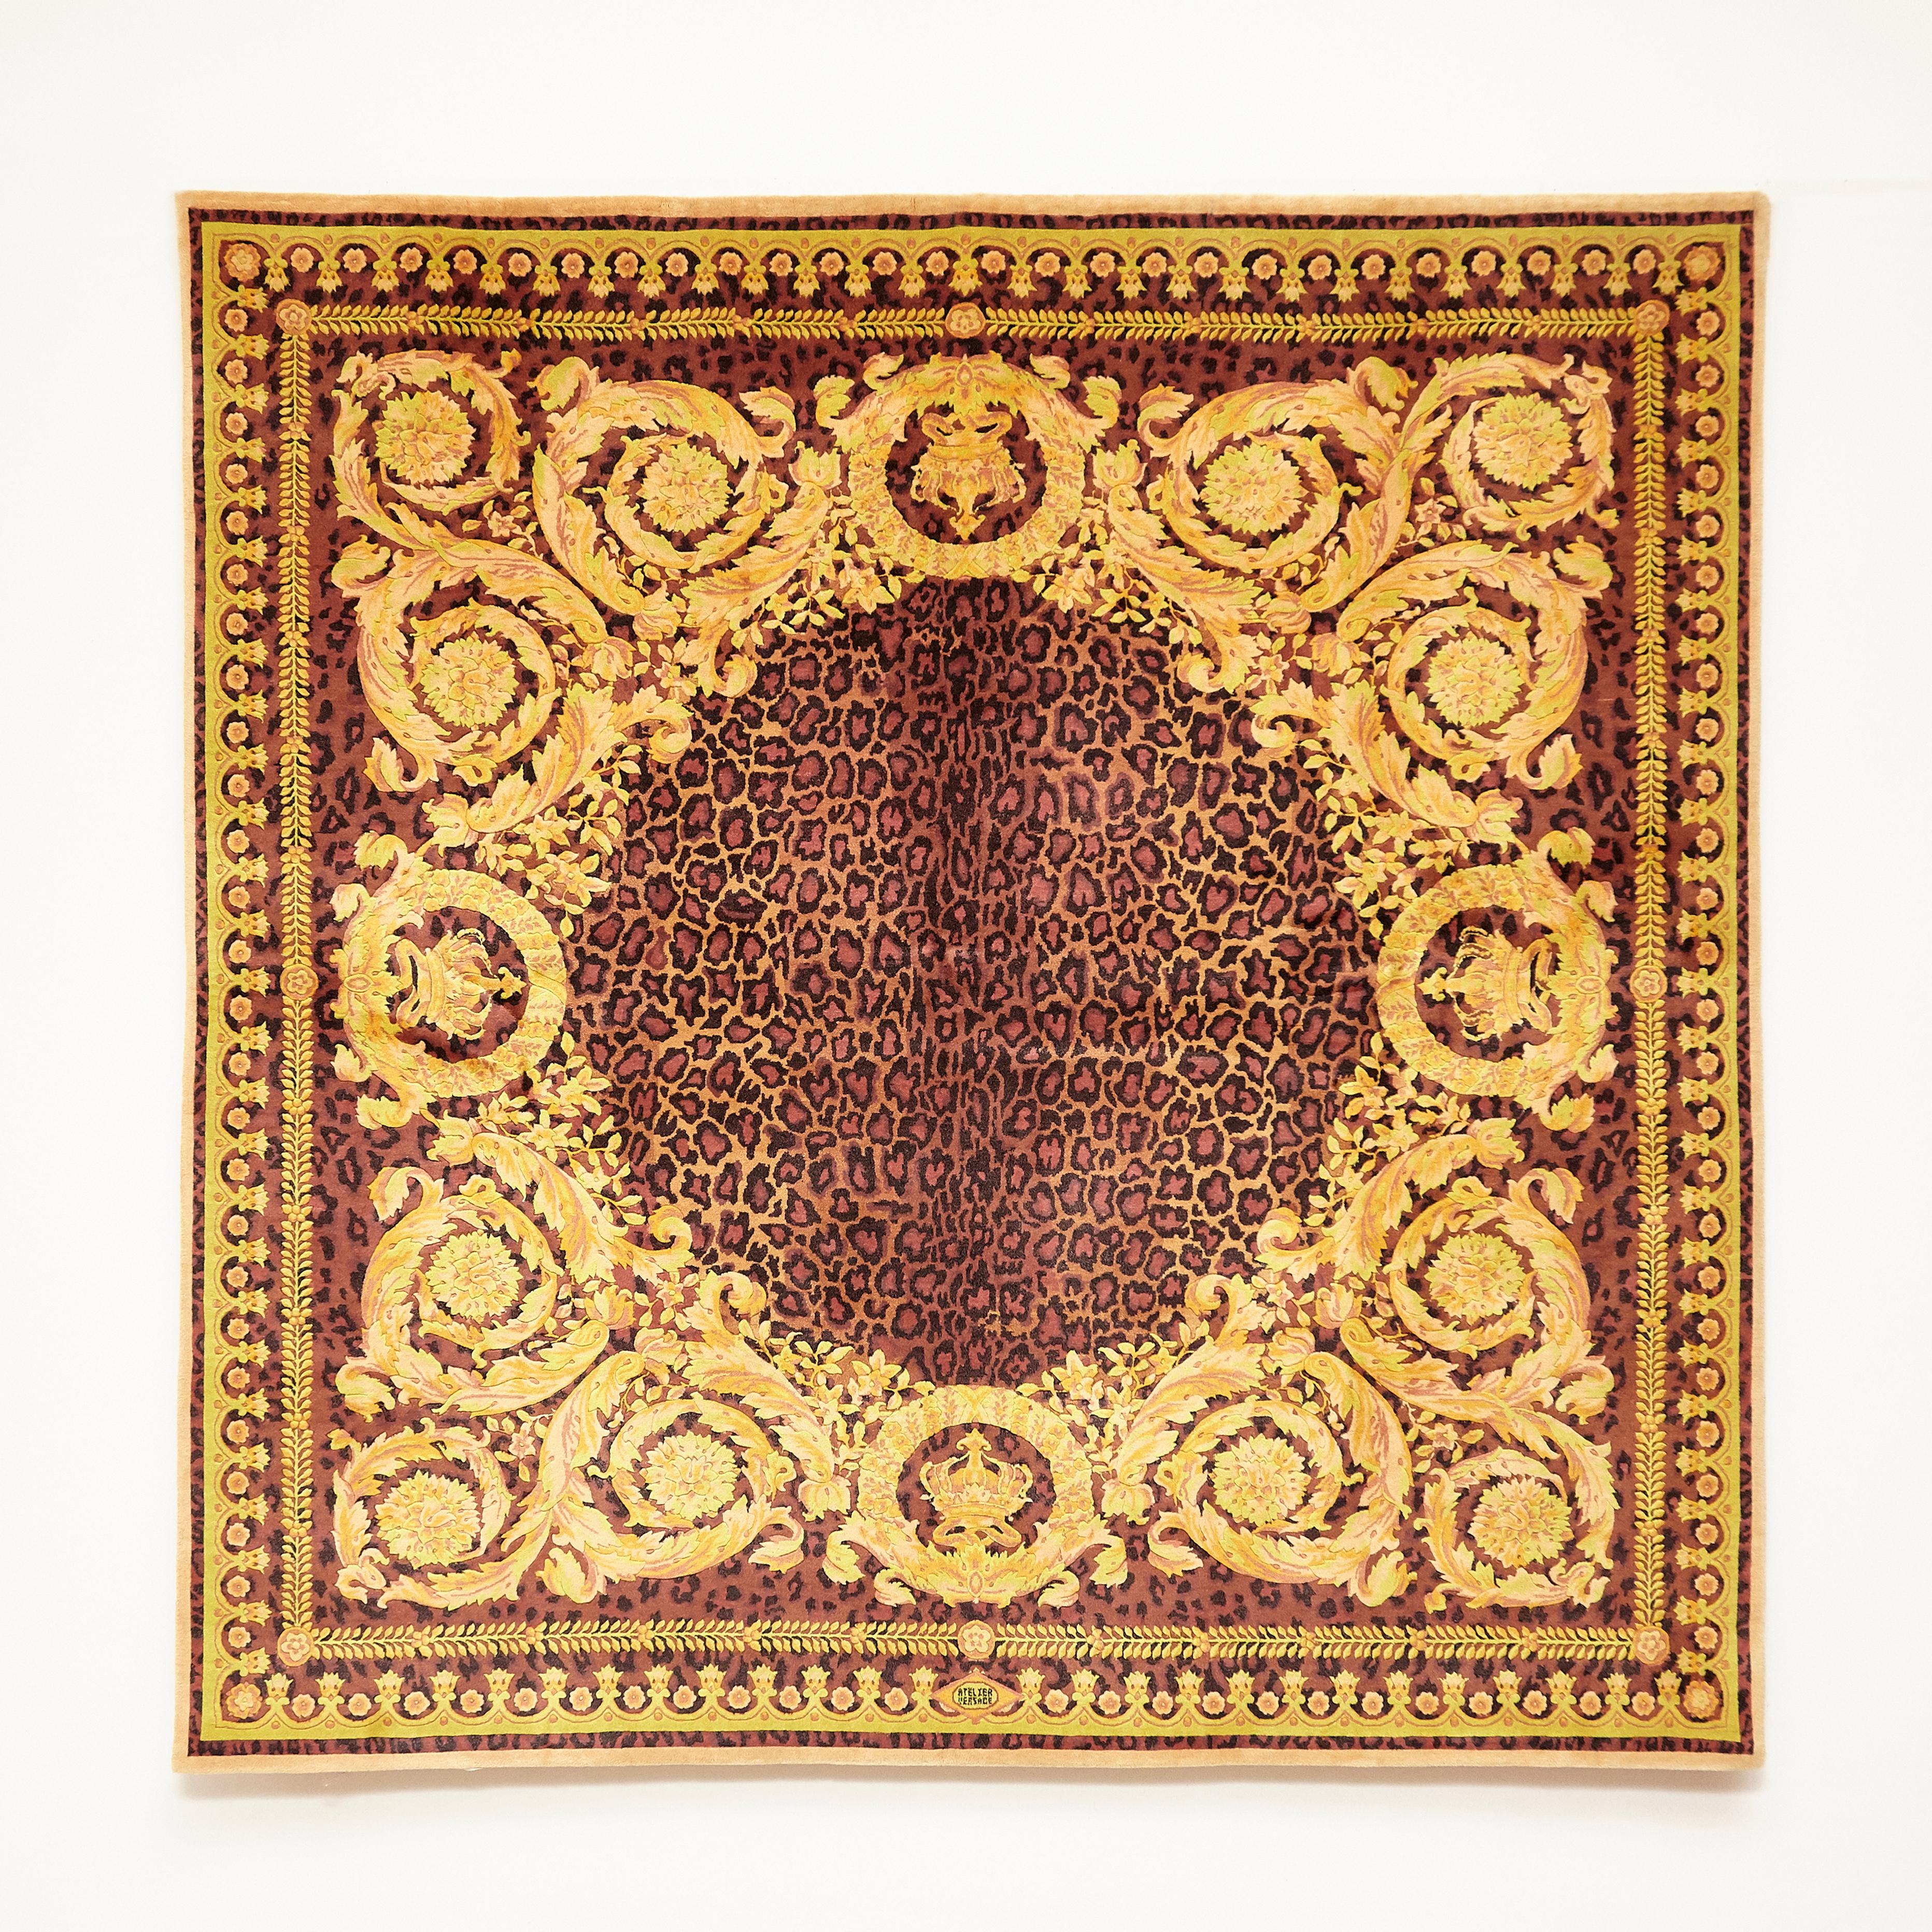 Rug designed and manufactured by Atelier Versace

Wild Barocco

Measures: 220 x 220 

In good original condition, with minor wear consistent with age and use

A vintage Gianni Versace home signature wool rug. Baroque gold tones, leopard